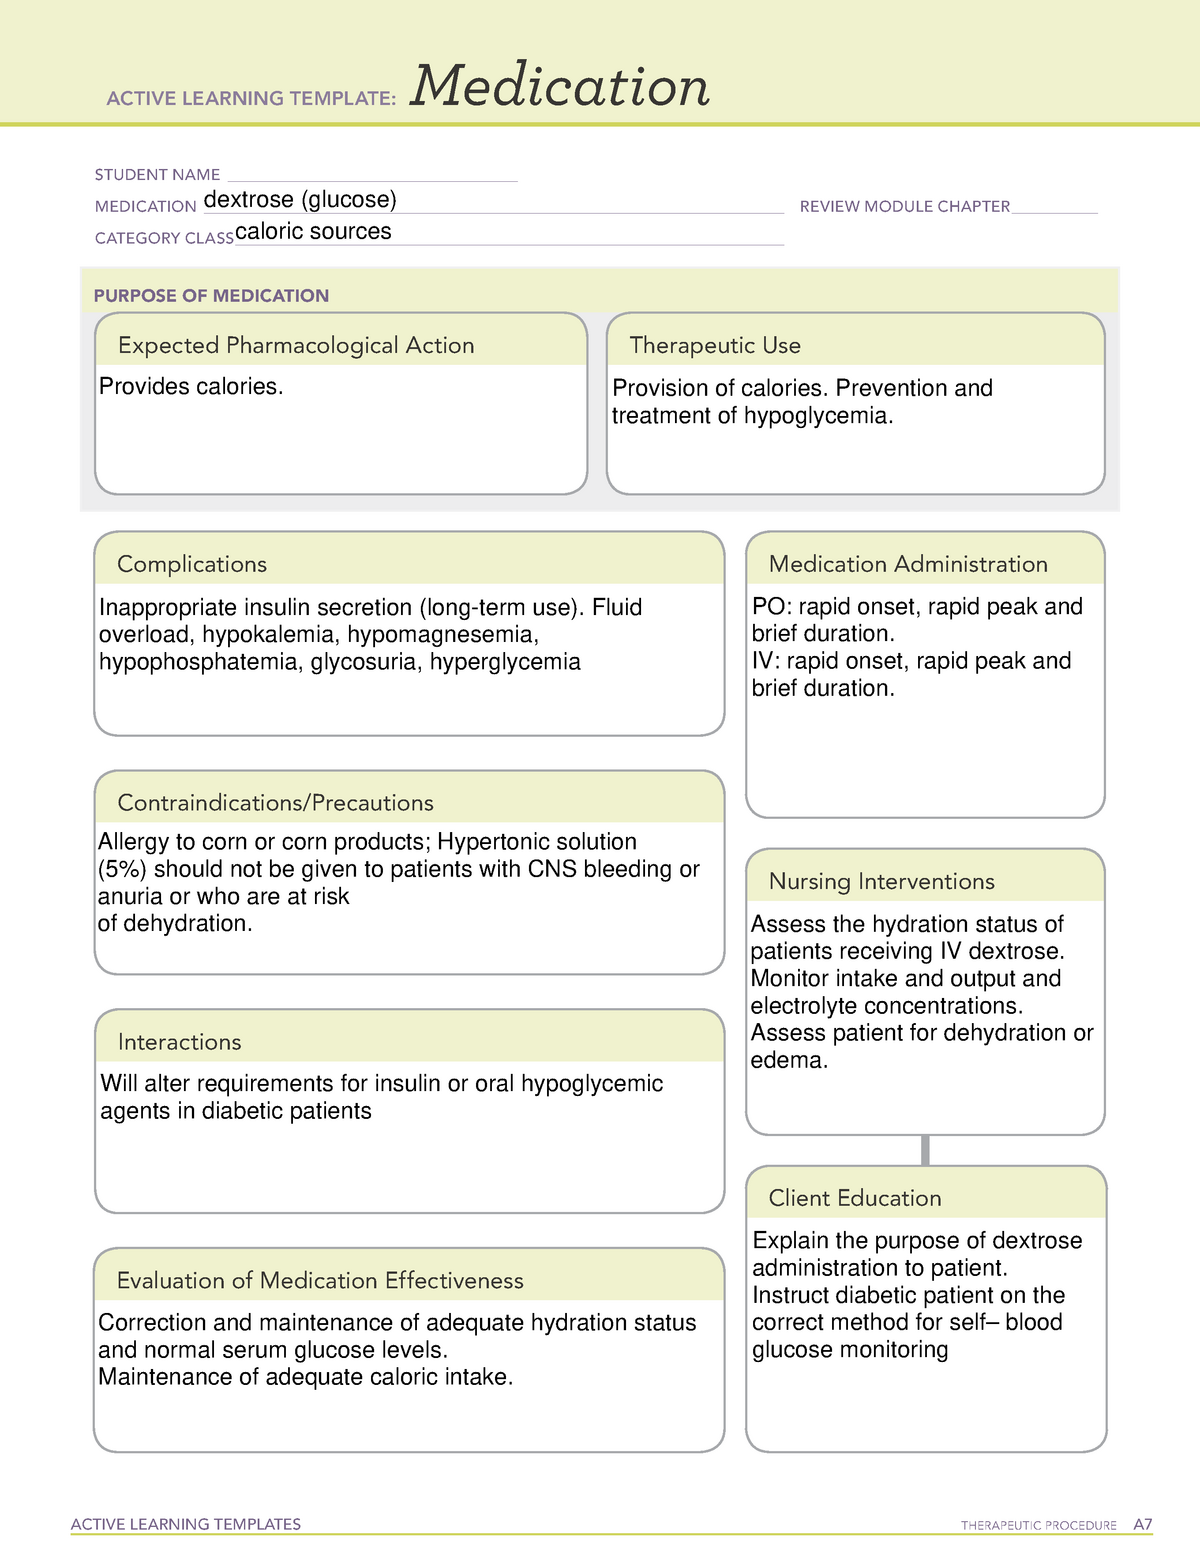 Dextrose Med card ACTIVE LEARNING TEMPLATES THERAPEUTIC PROCEDURE A